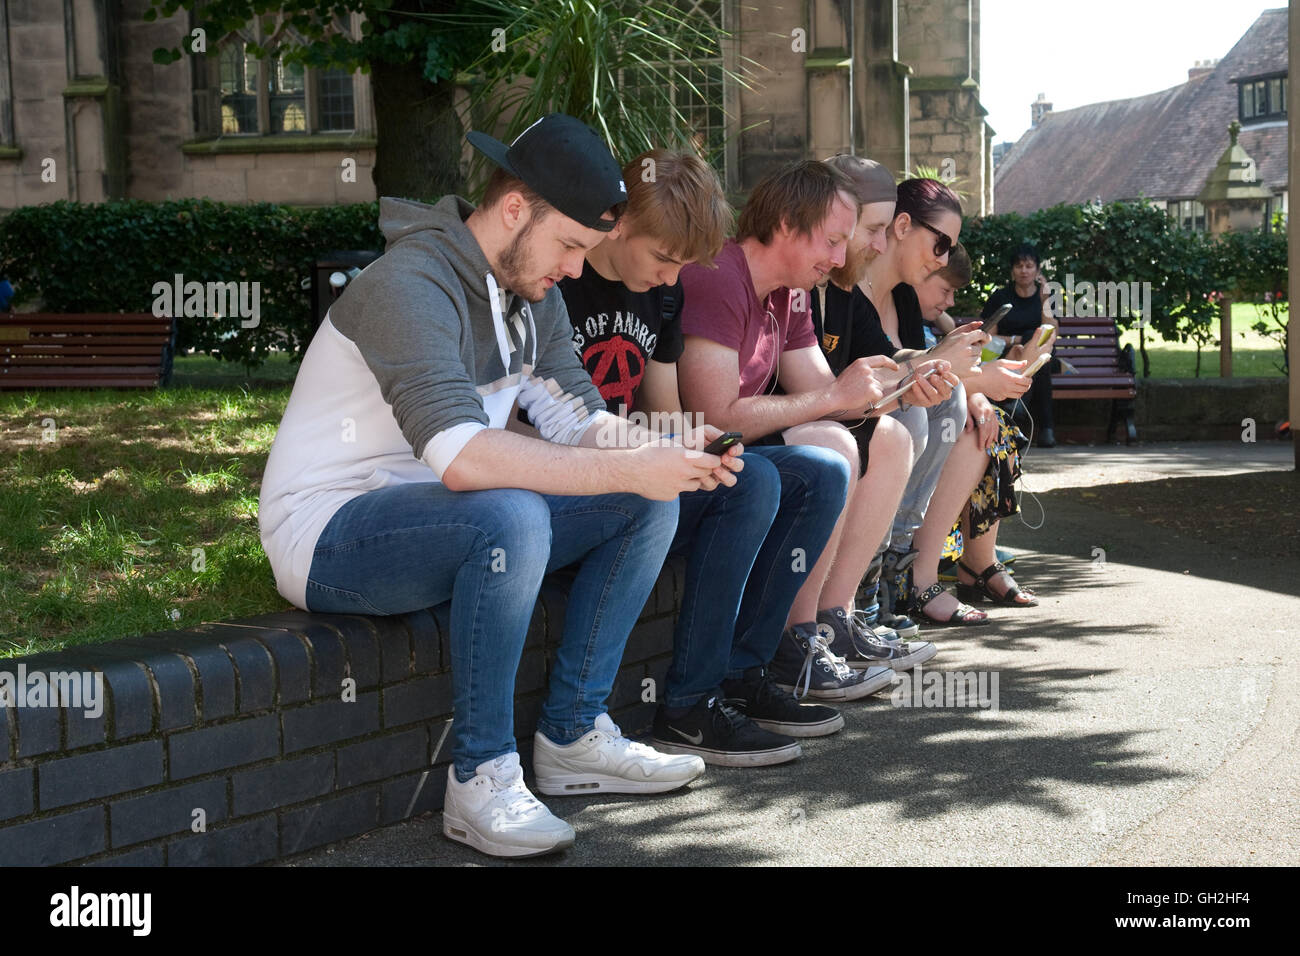 A group of people, male and female, checking the internet, social media etc on their mobile phones in public. Shrewsbury, Shropshire, summer 2016 Stock Photo